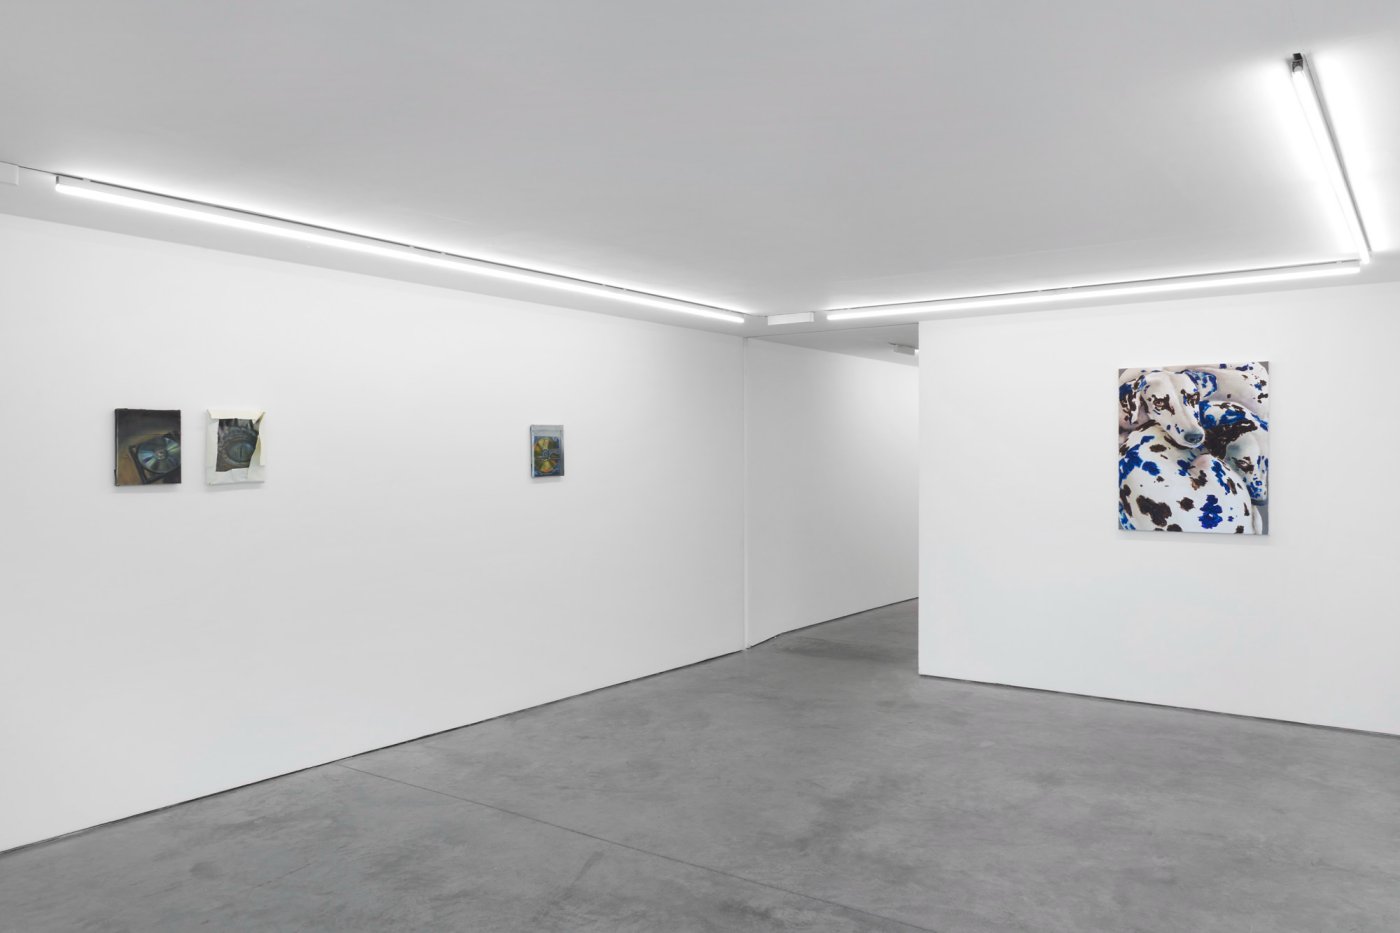 Installation image for Tomas Harker, Jack Jubb, Mia Middleton and Caroline Zurmely: Apotrope, at Cob Gallery